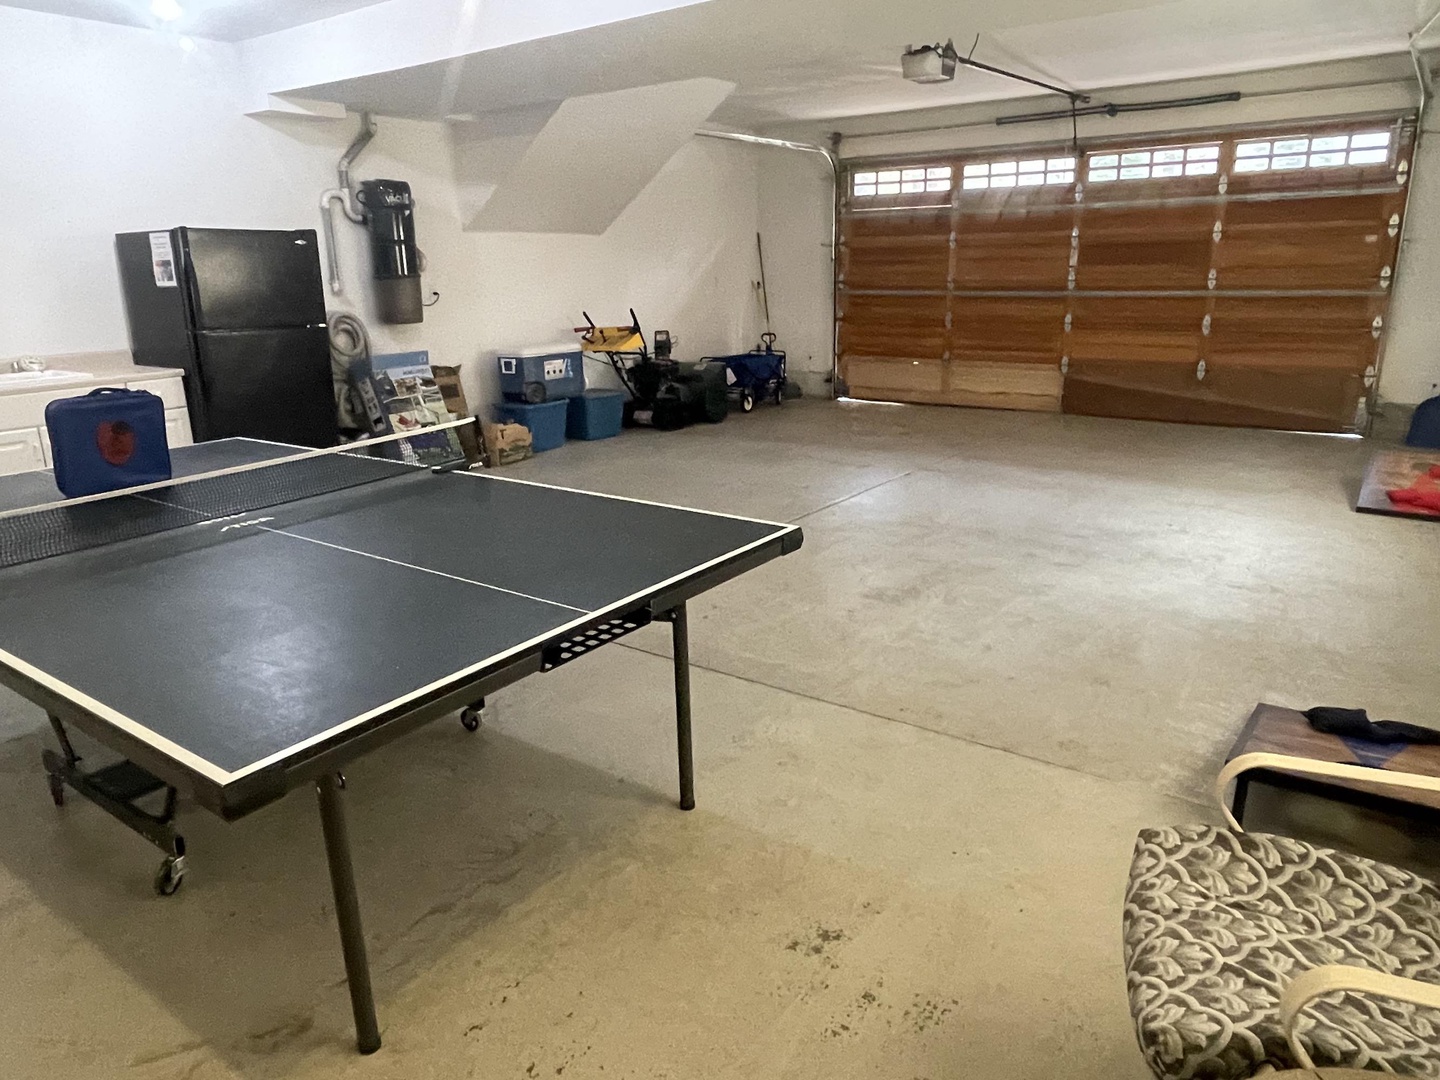 Garage with ping pong table and corn hole